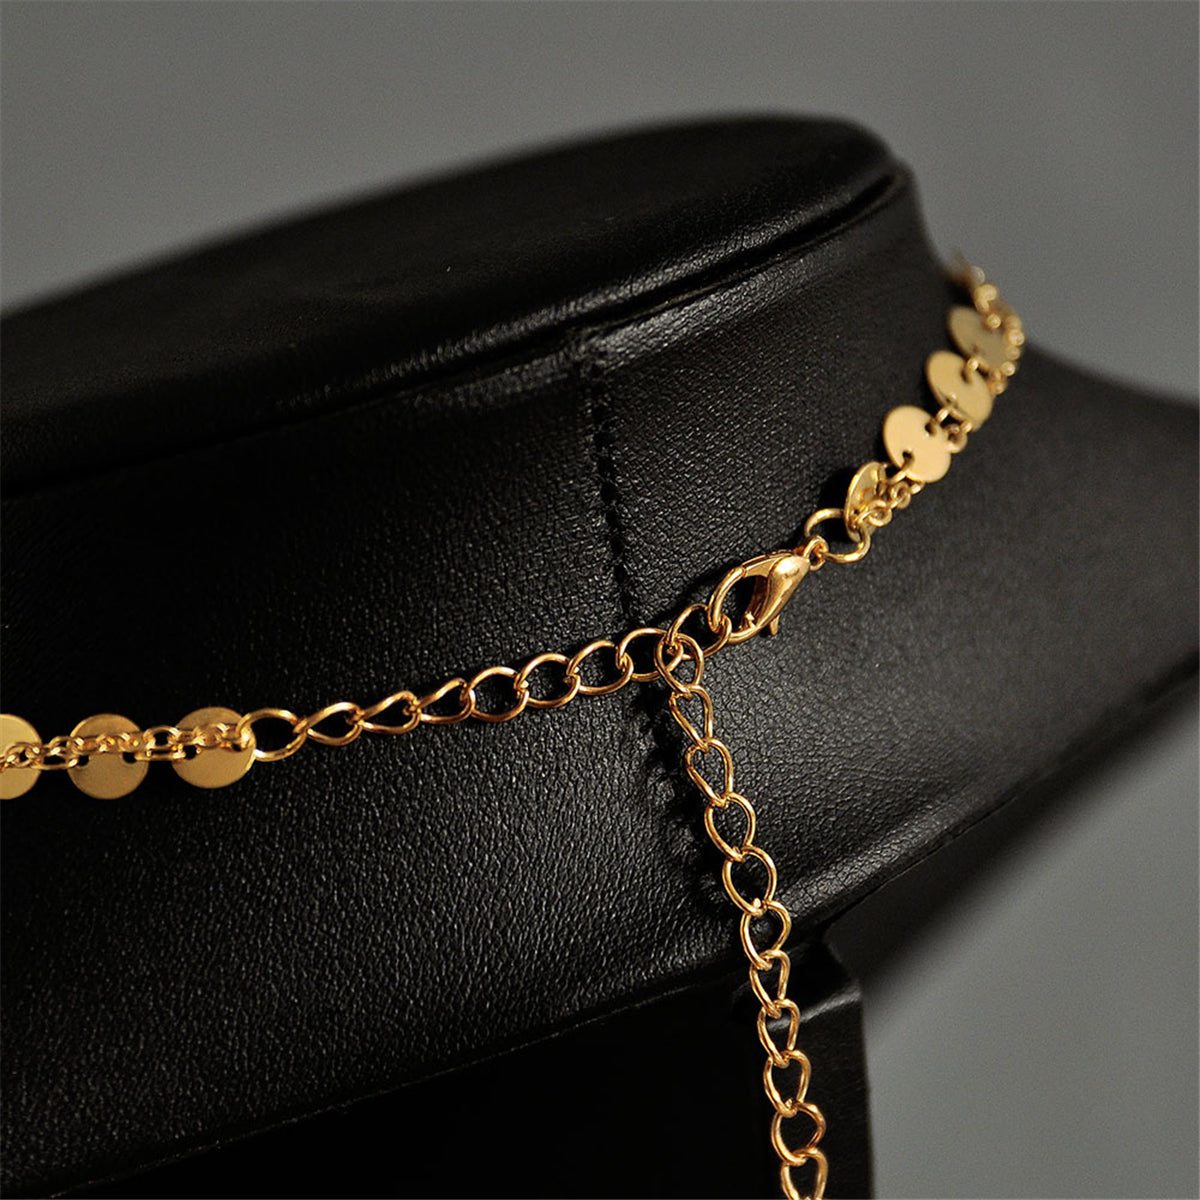 18K Gold-Plated Disc Star Layered Choker Necklace